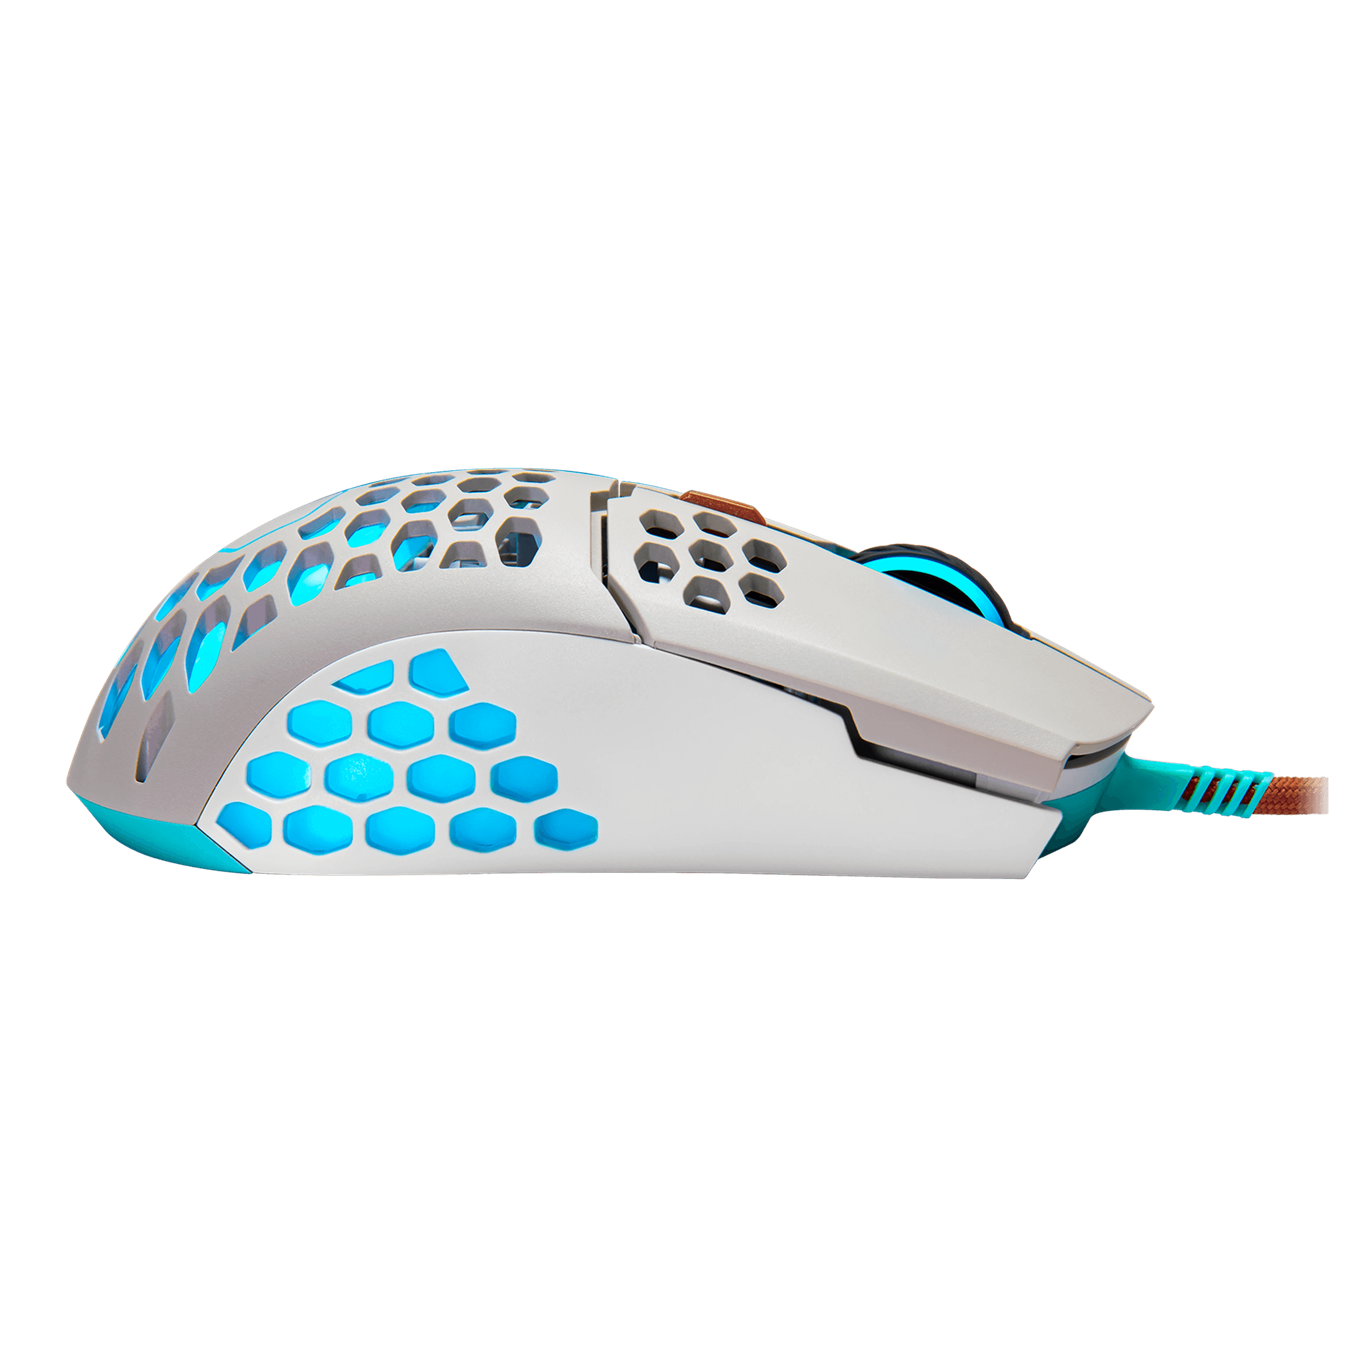 MM711 Retro RGB Gaming Mouse - Adjustable up to 16000 DPI for greater control, precision, and future-proofing